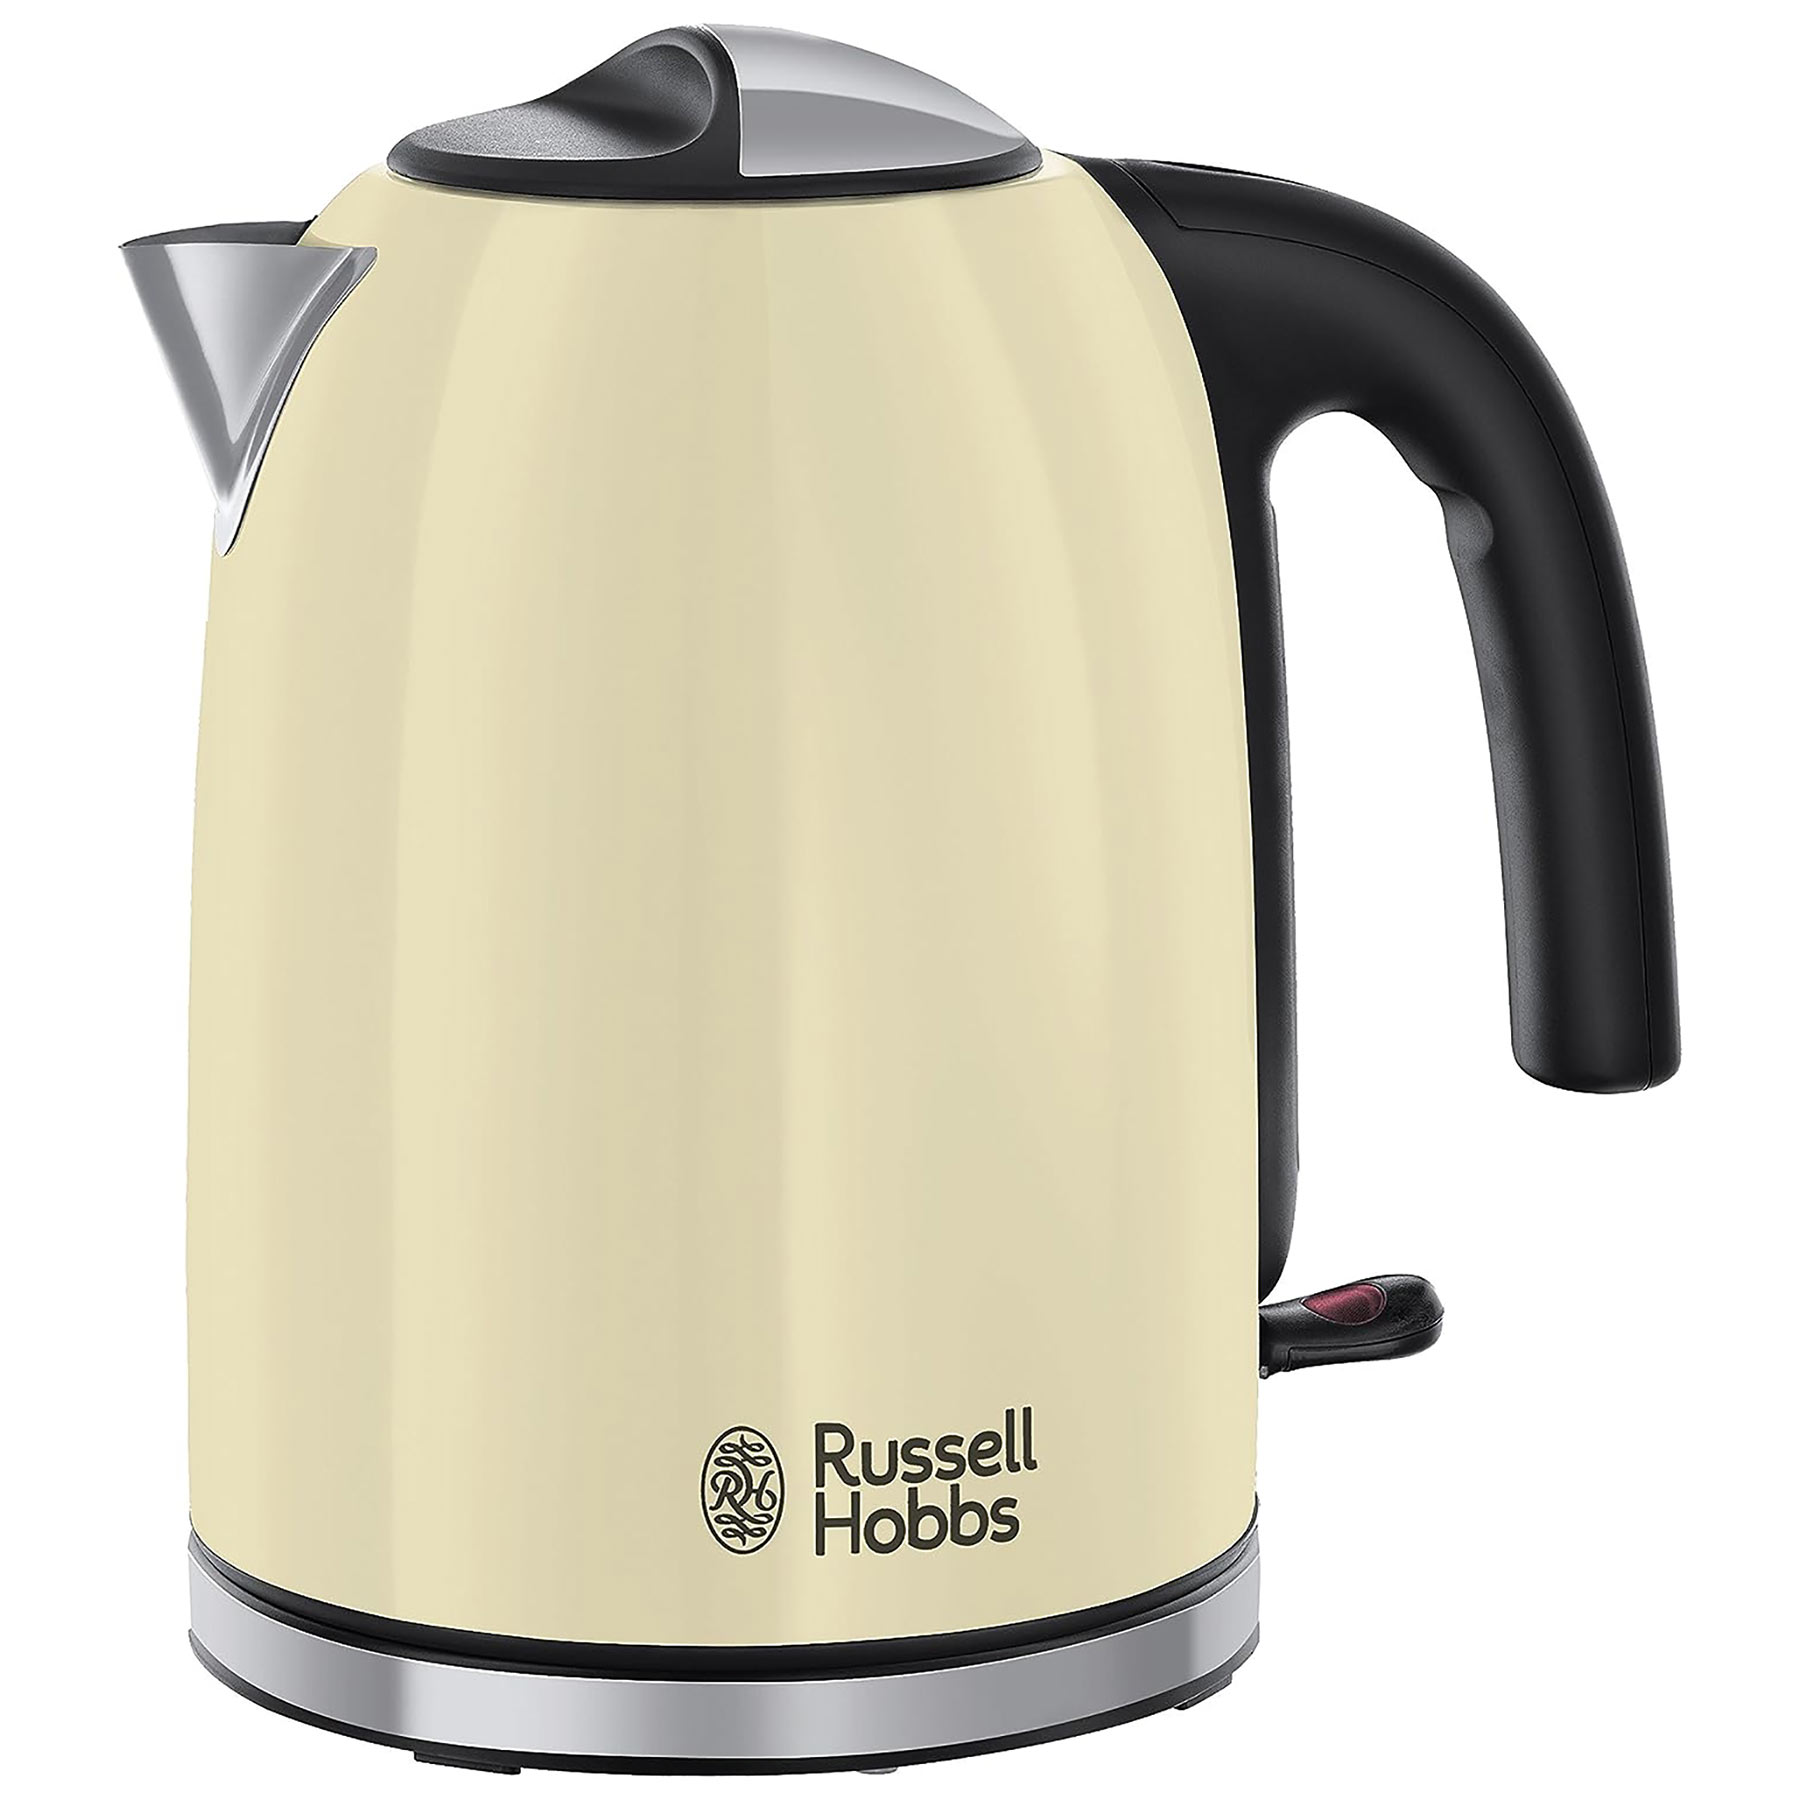 Image of Russell Hobbs 20415 Colours Plus Jug Kettle in Cream 1 7L